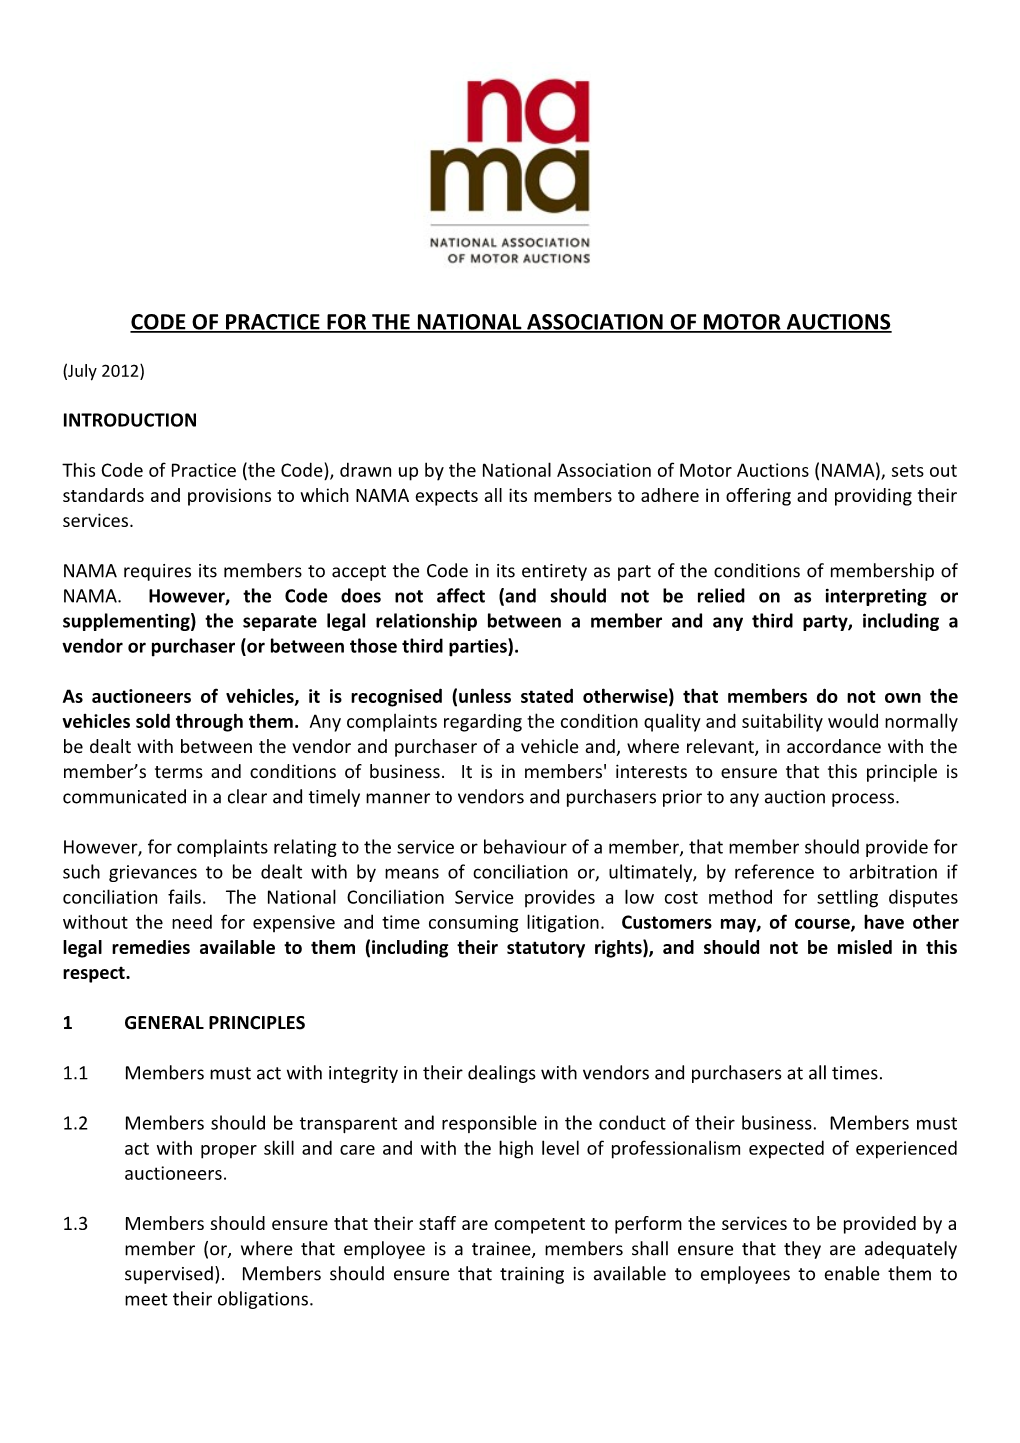 Code of Practice for the National Association of Motor Auctions